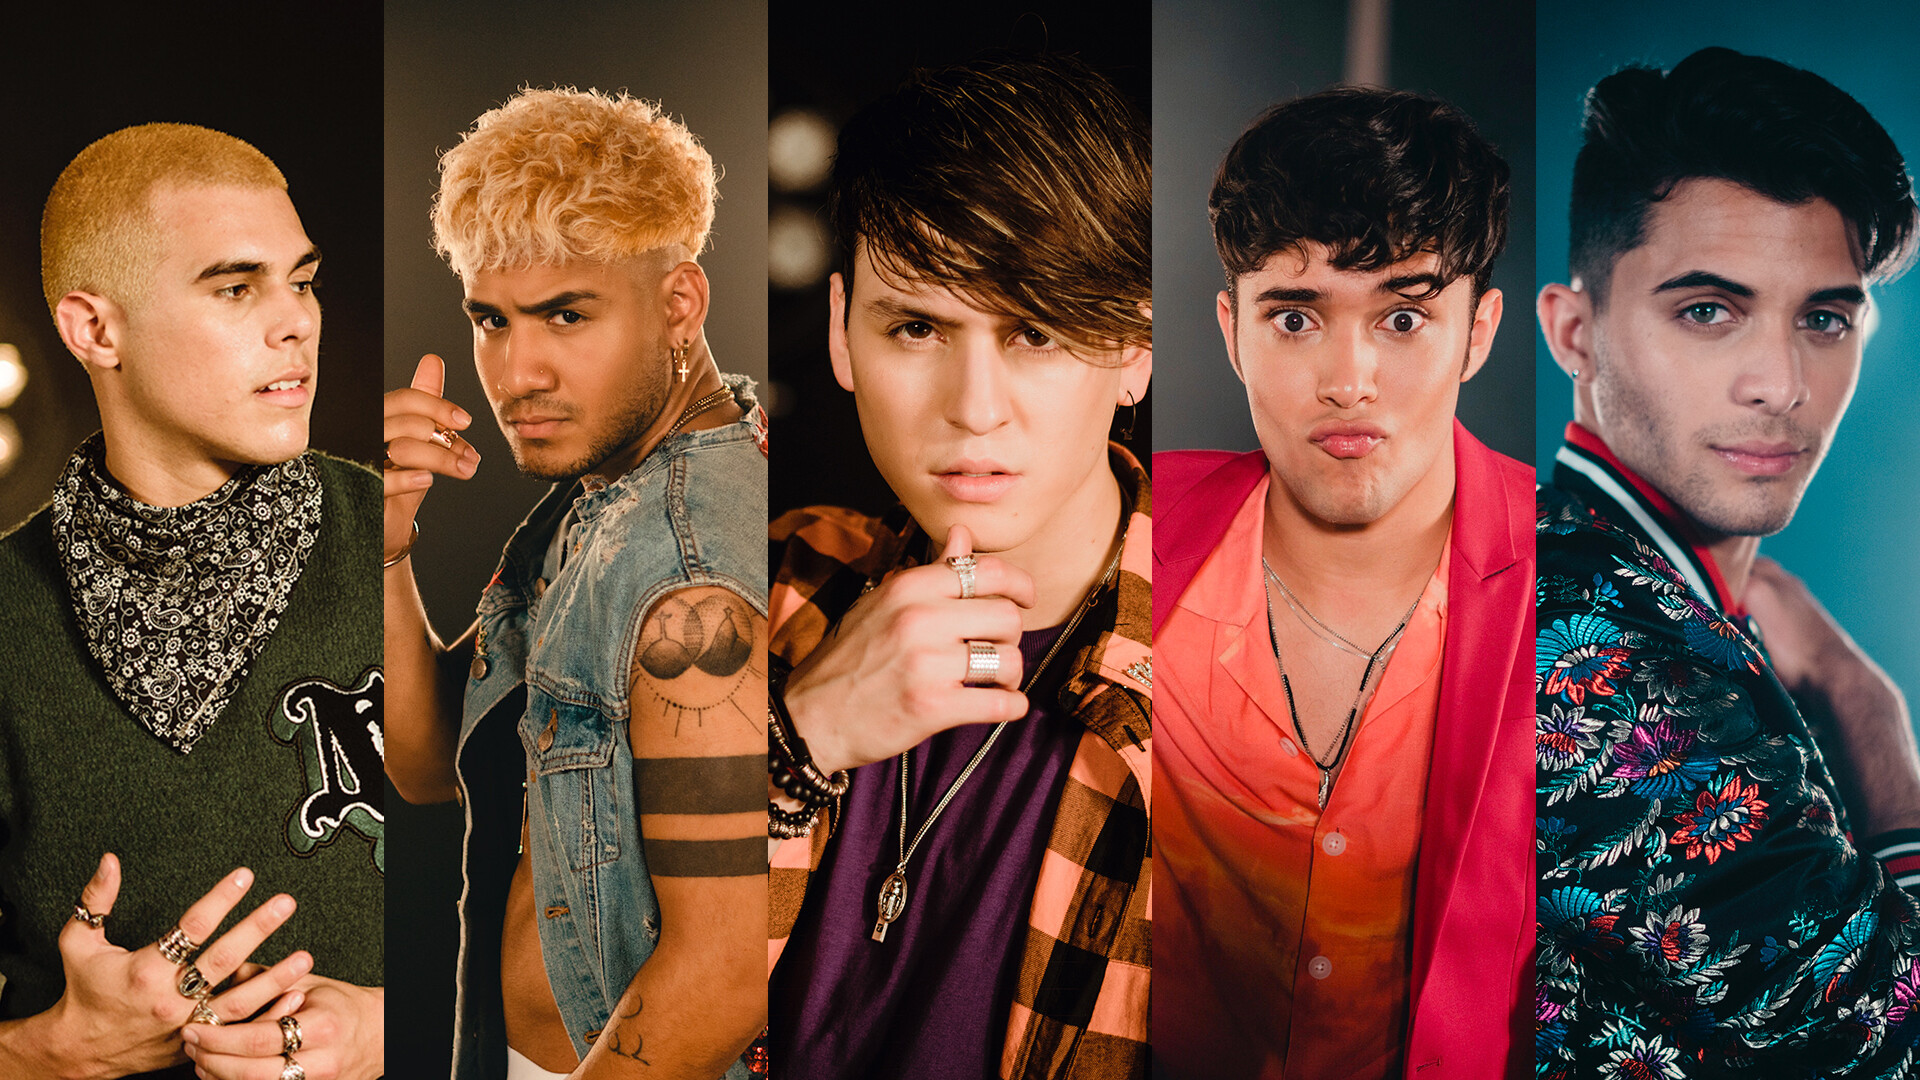 CNCO, New music video, Trendsetting sound, Catchy tunes, 1920x1080 Full HD Desktop